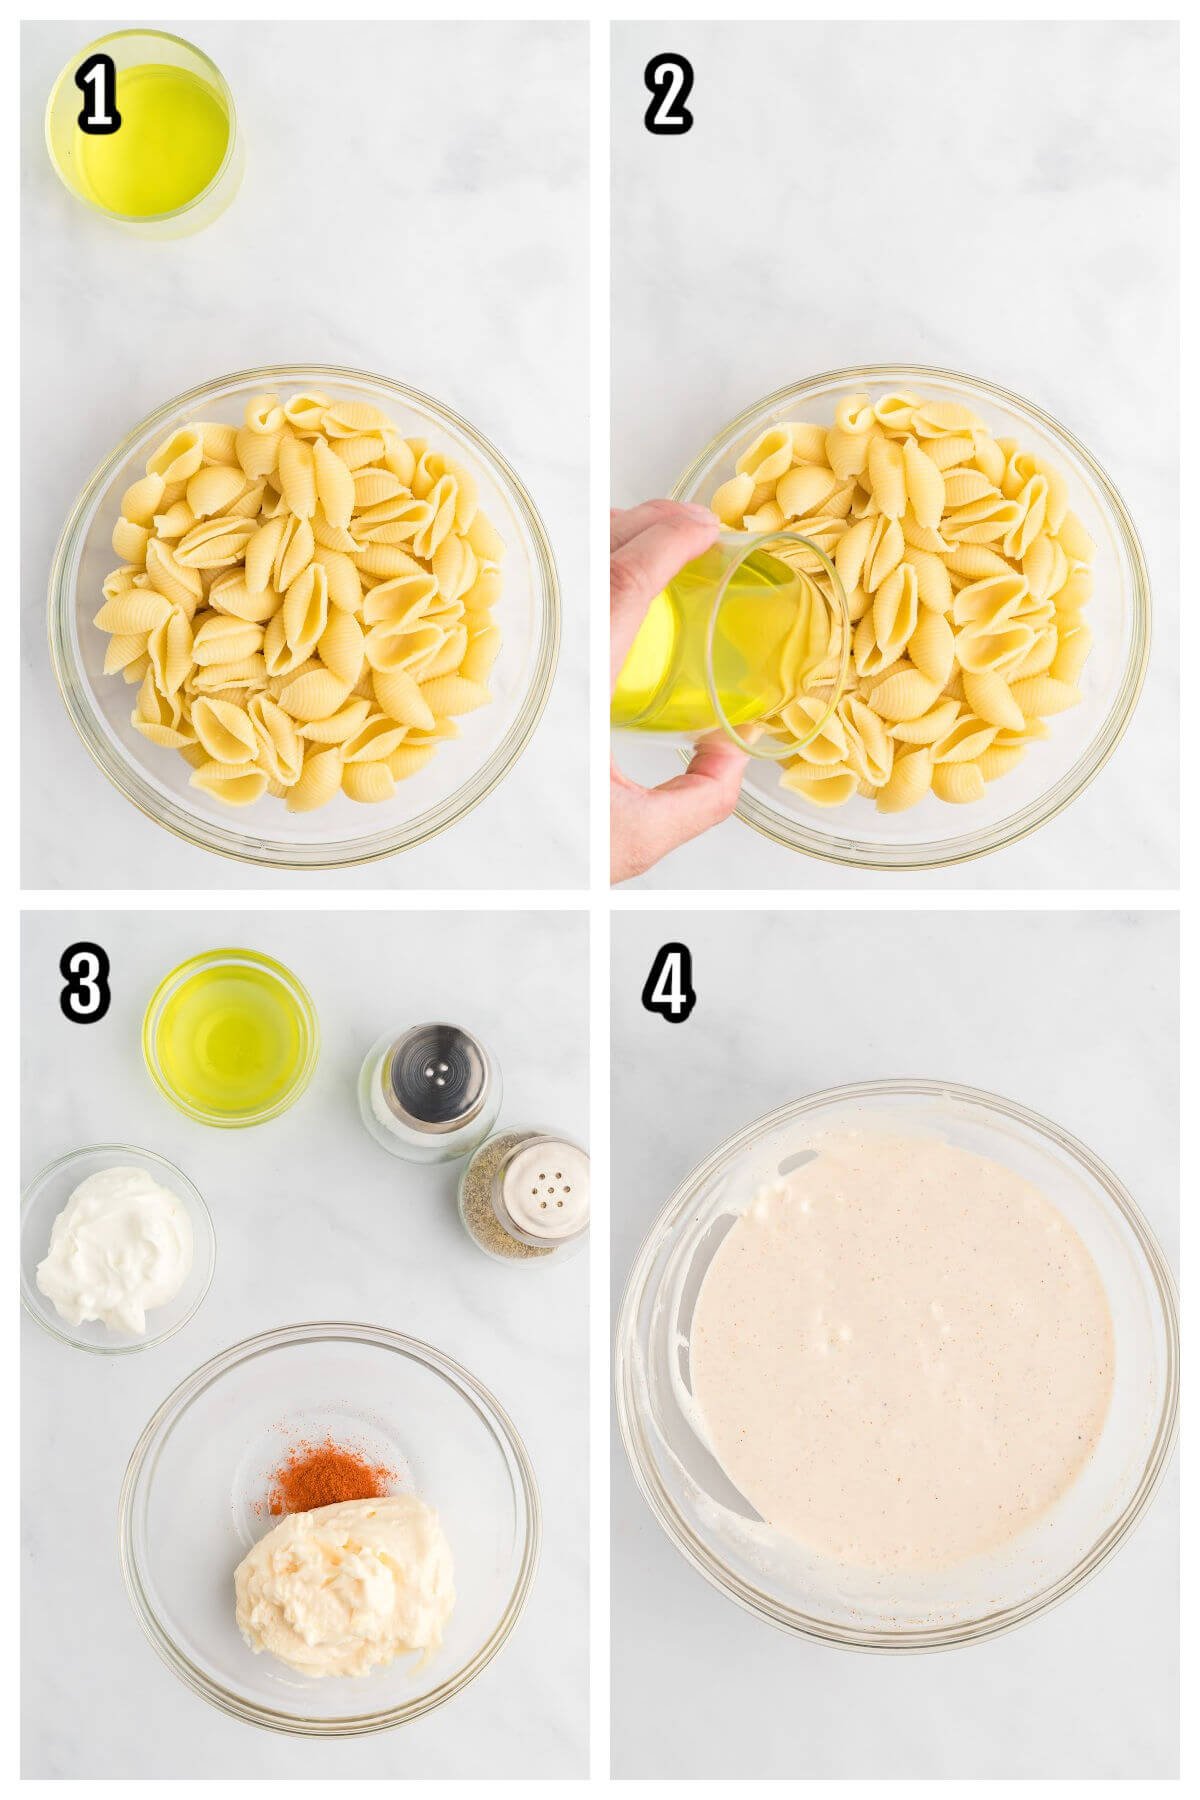 First set of four steps to making the pasta salad with dill pickles. 